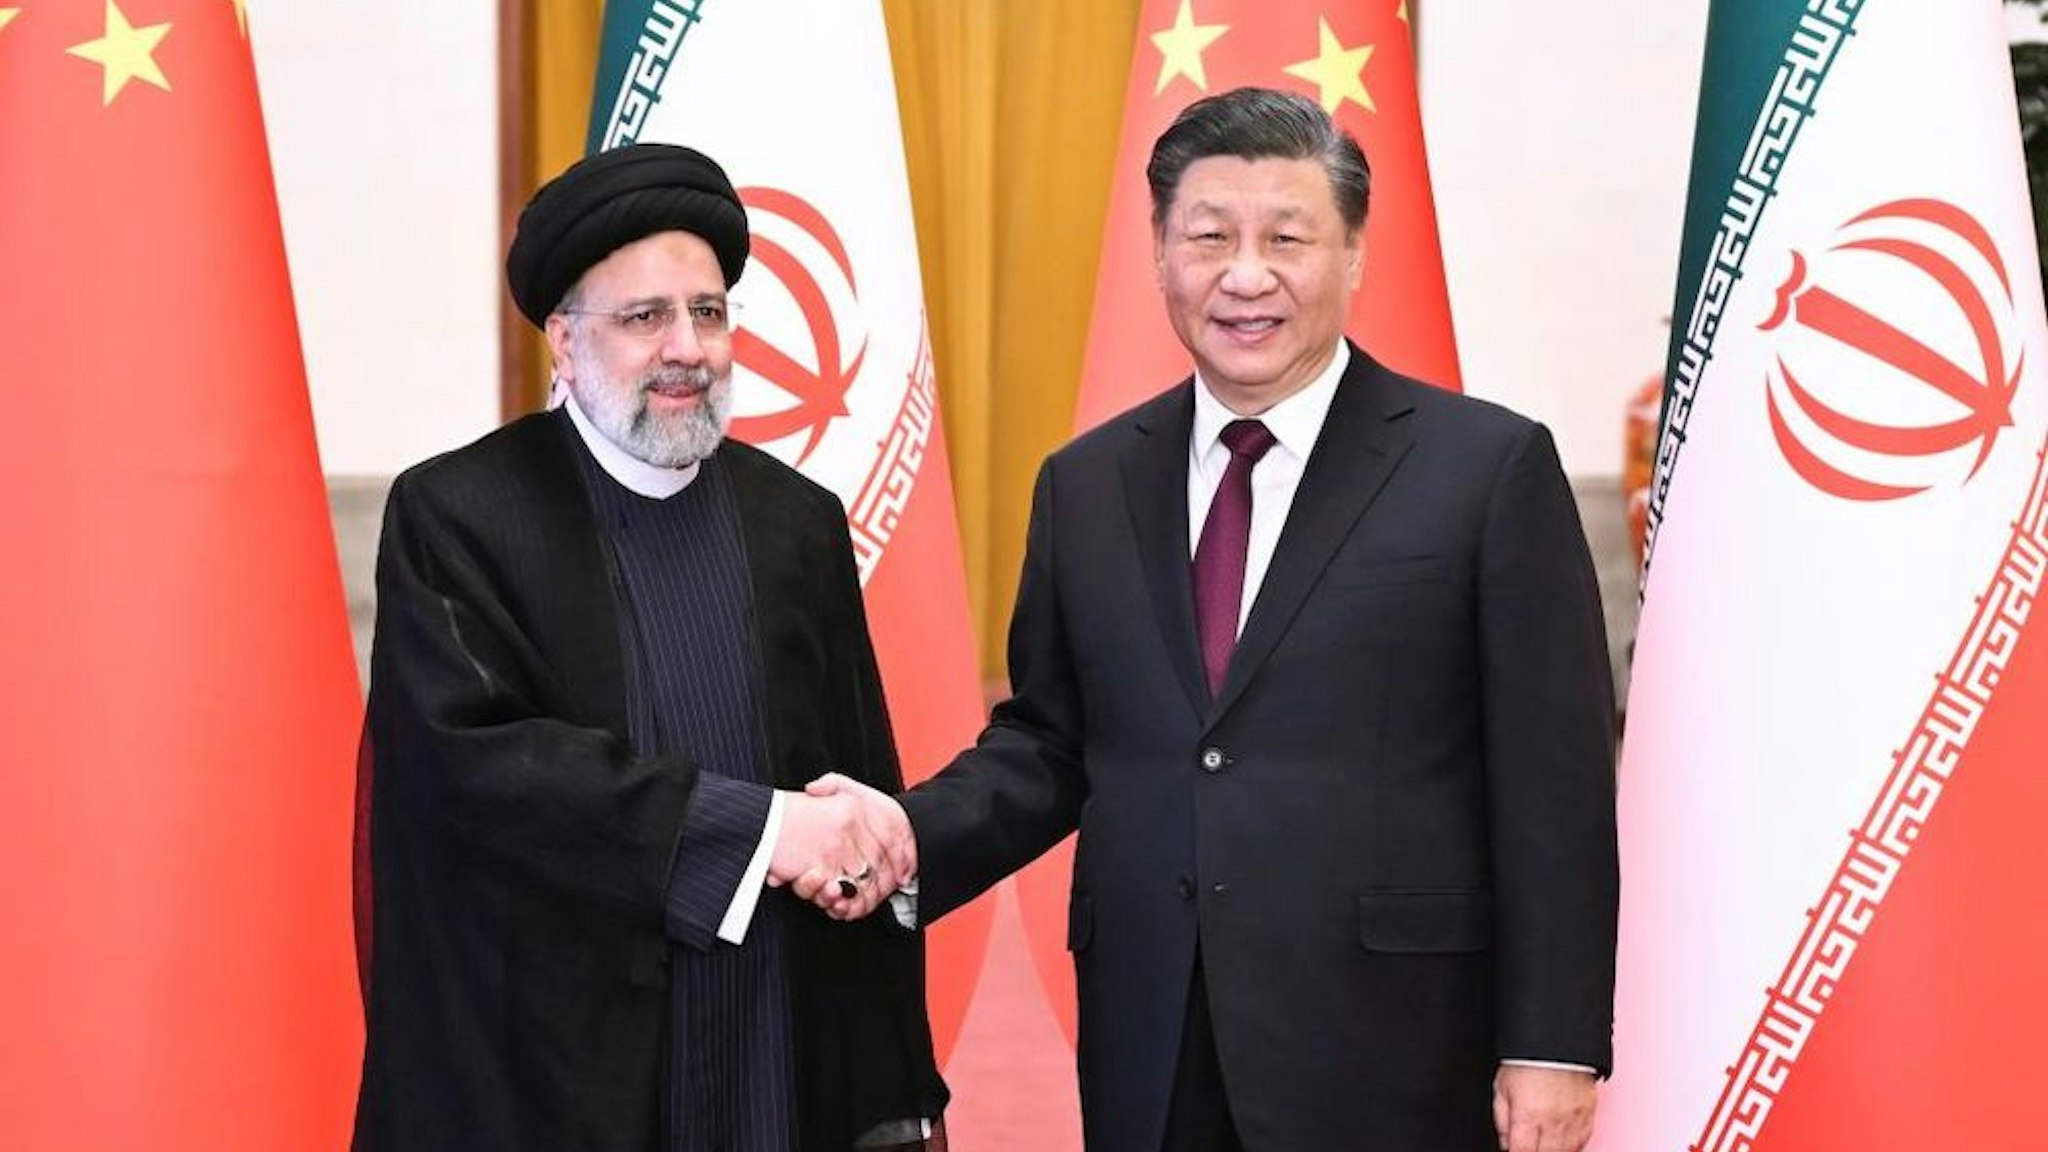 Chinese President Xi Jinping holds a welcoming ceremony for visiting President of the Islamic Republic of Iran Ebrahim Raisi prior to their talks at the Great Hall of the People in Beijing, capital of China, Feb. 14, 2023. (Photo by Yan Yan/Xinhua via Getty Images)